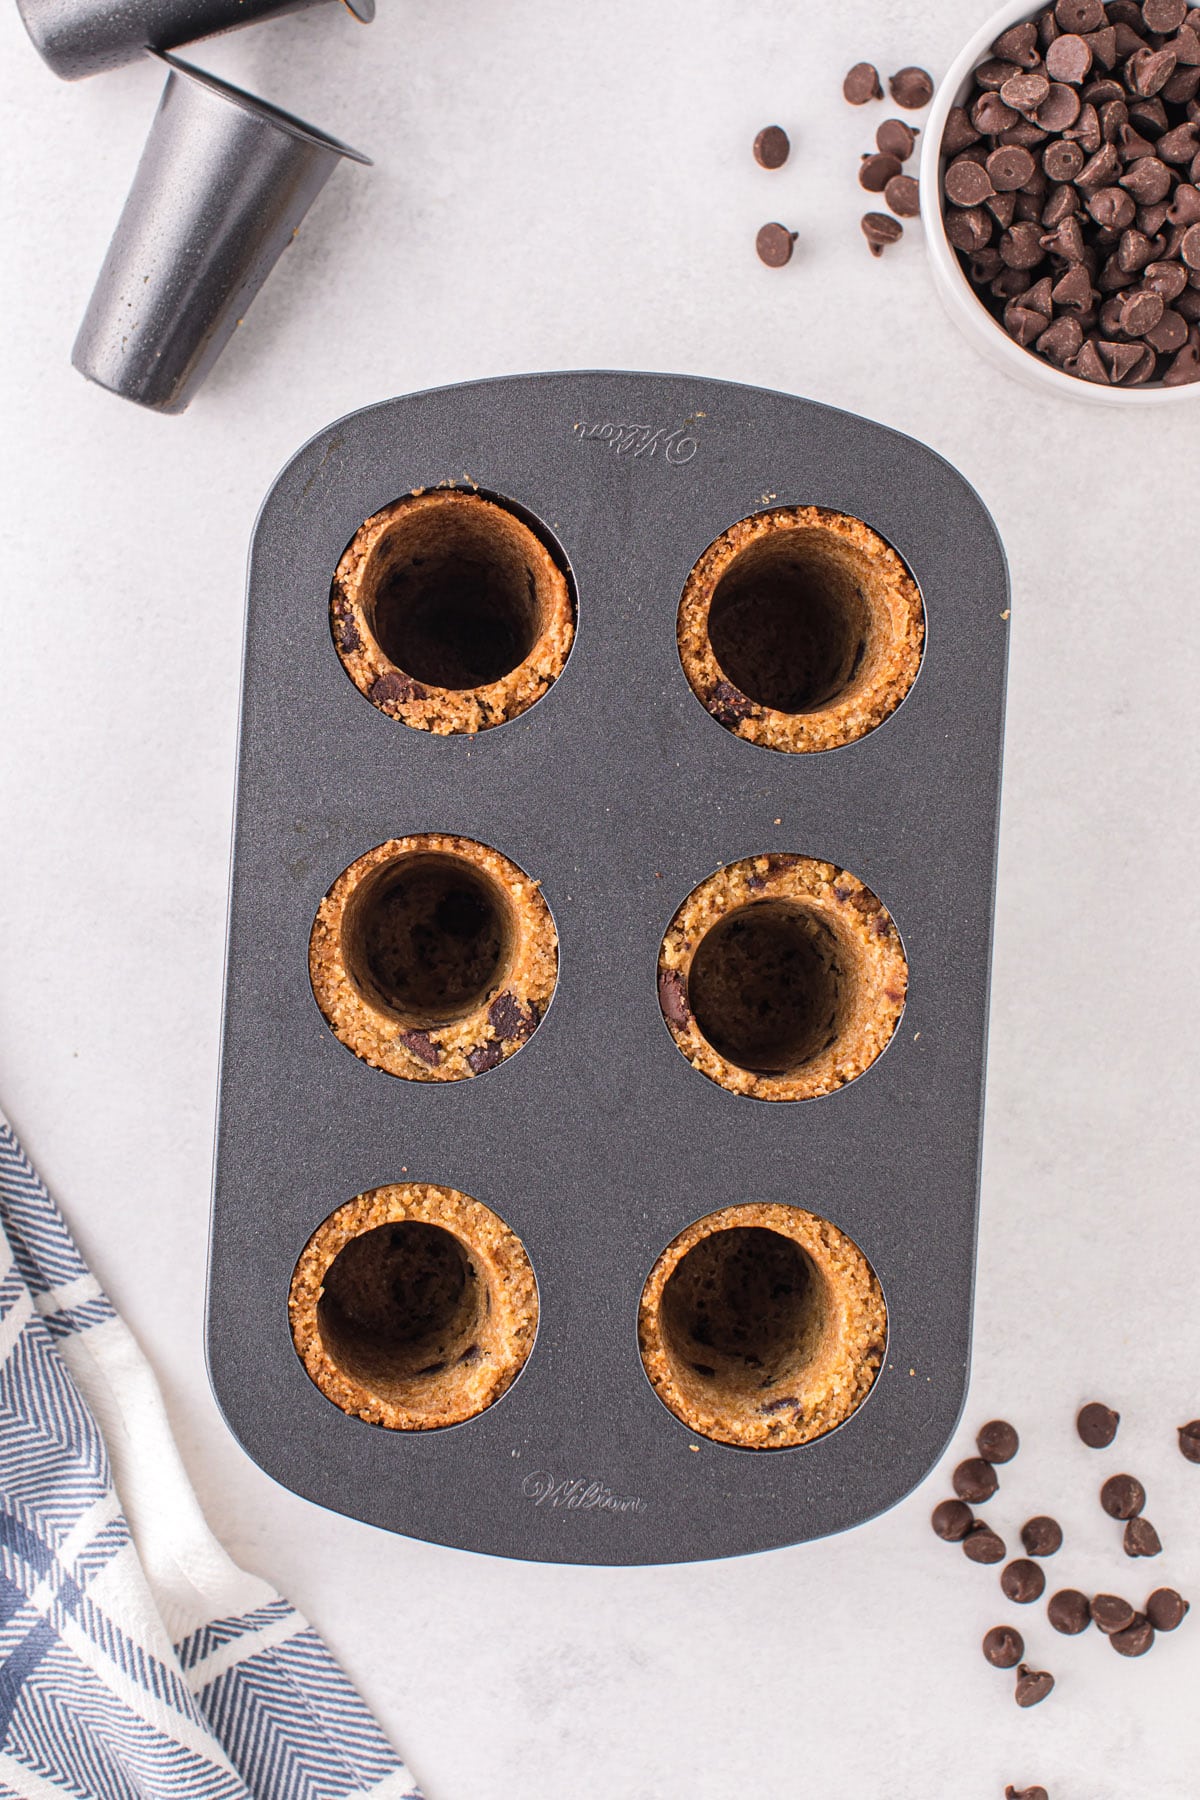 baked cookie shooters inside the mold